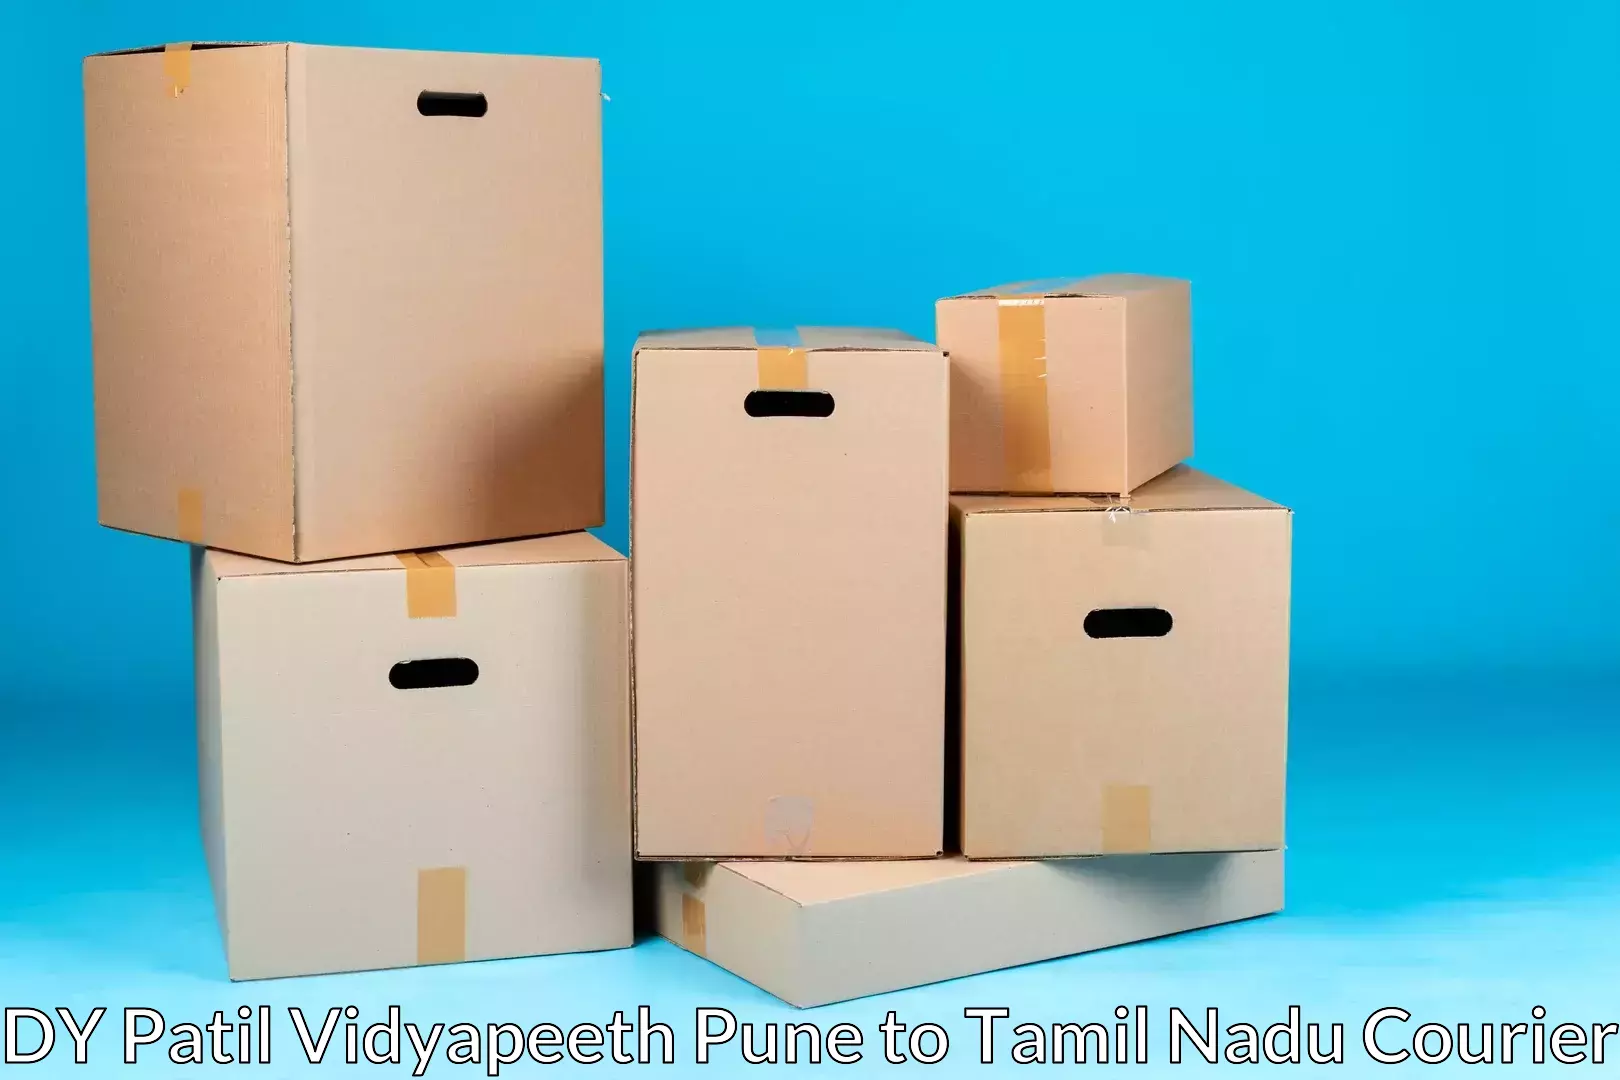 Comprehensive moving services DY Patil Vidyapeeth Pune to Chennai Port